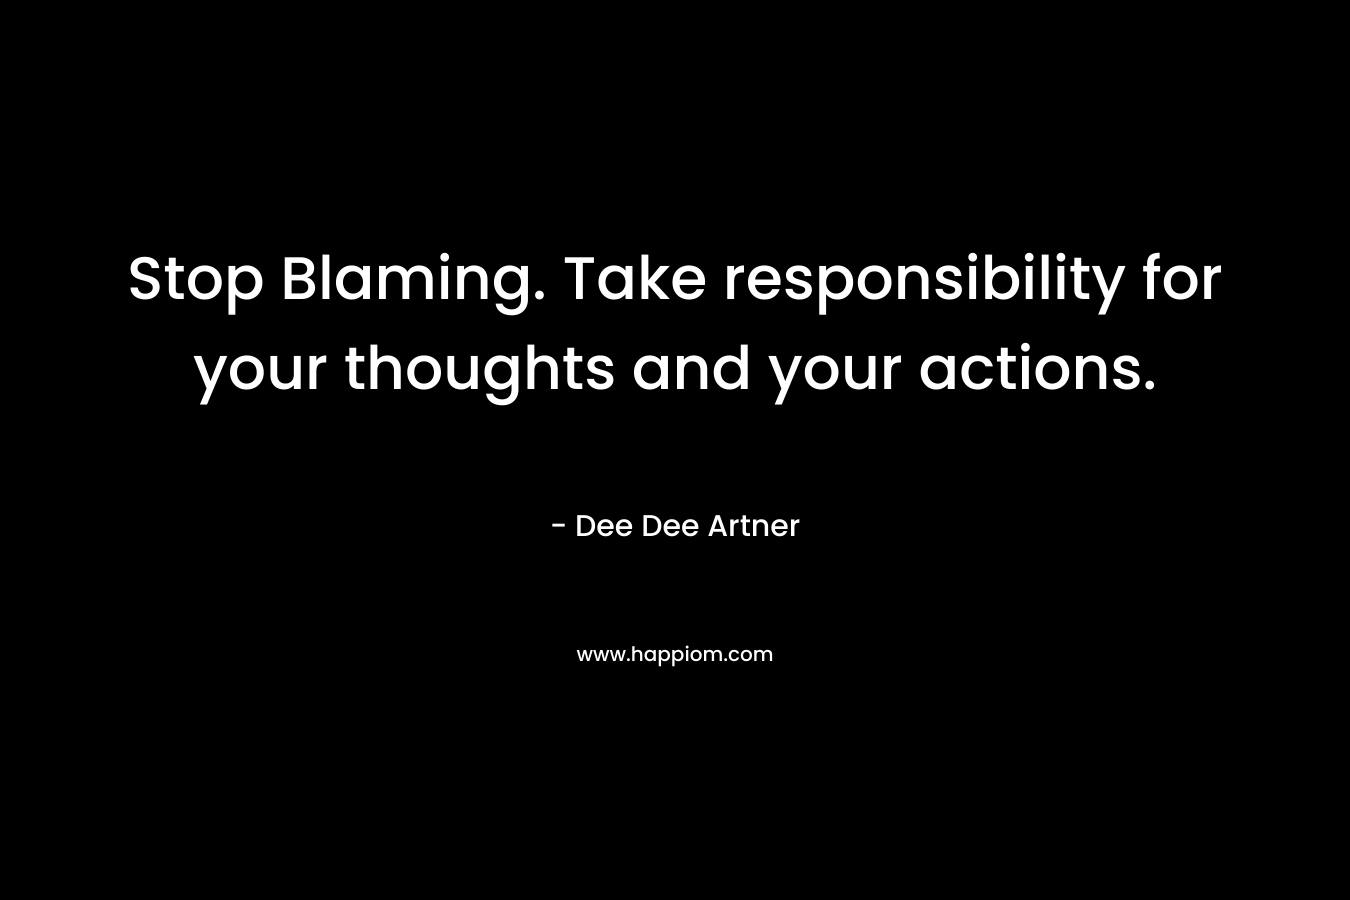 Stop Blaming. Take responsibility for your thoughts and your actions. – Dee Dee Artner